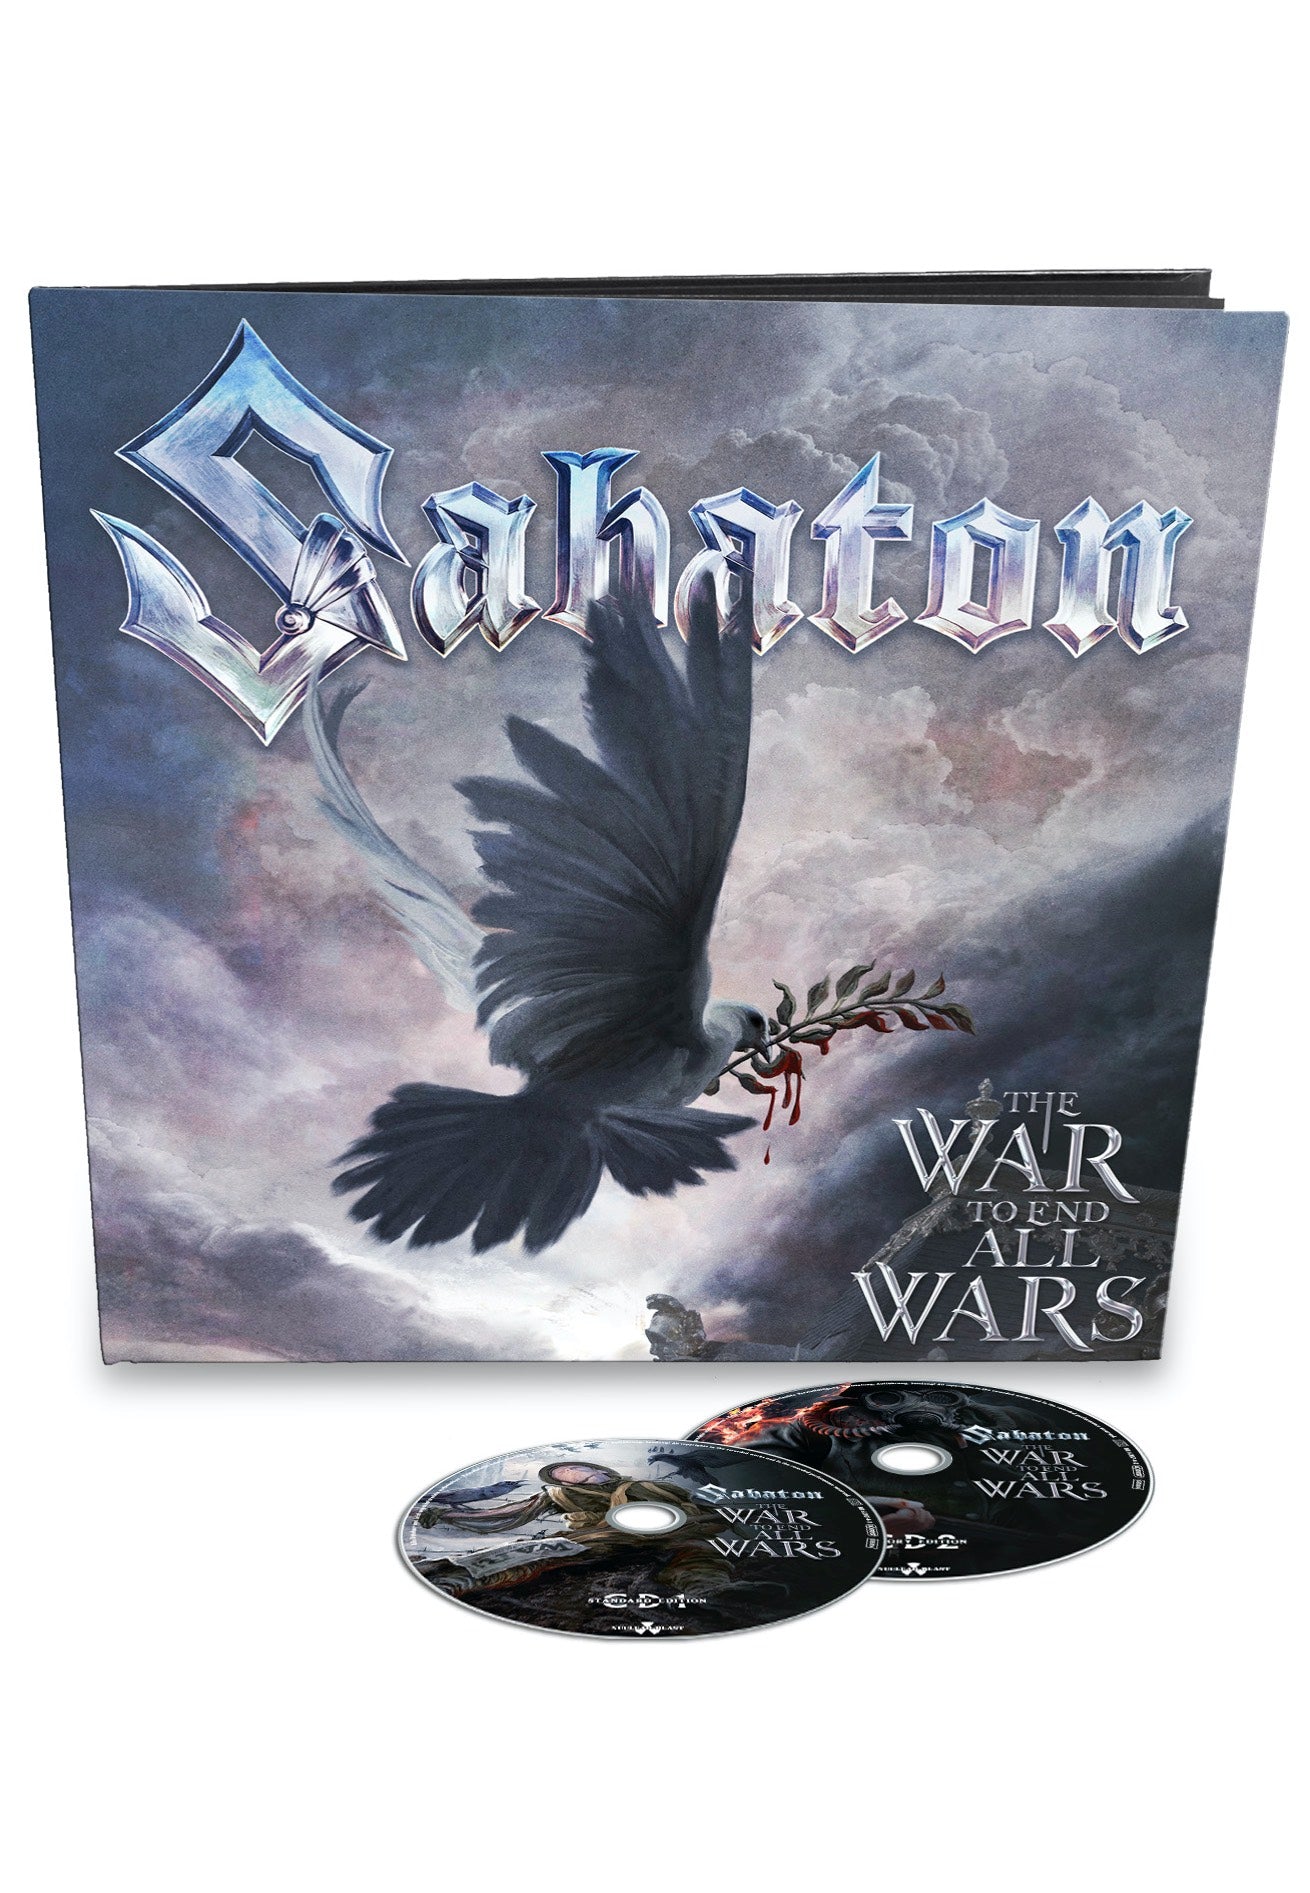 Sabaton - The War To End All Wars Ltd. - Earbook 2 CD